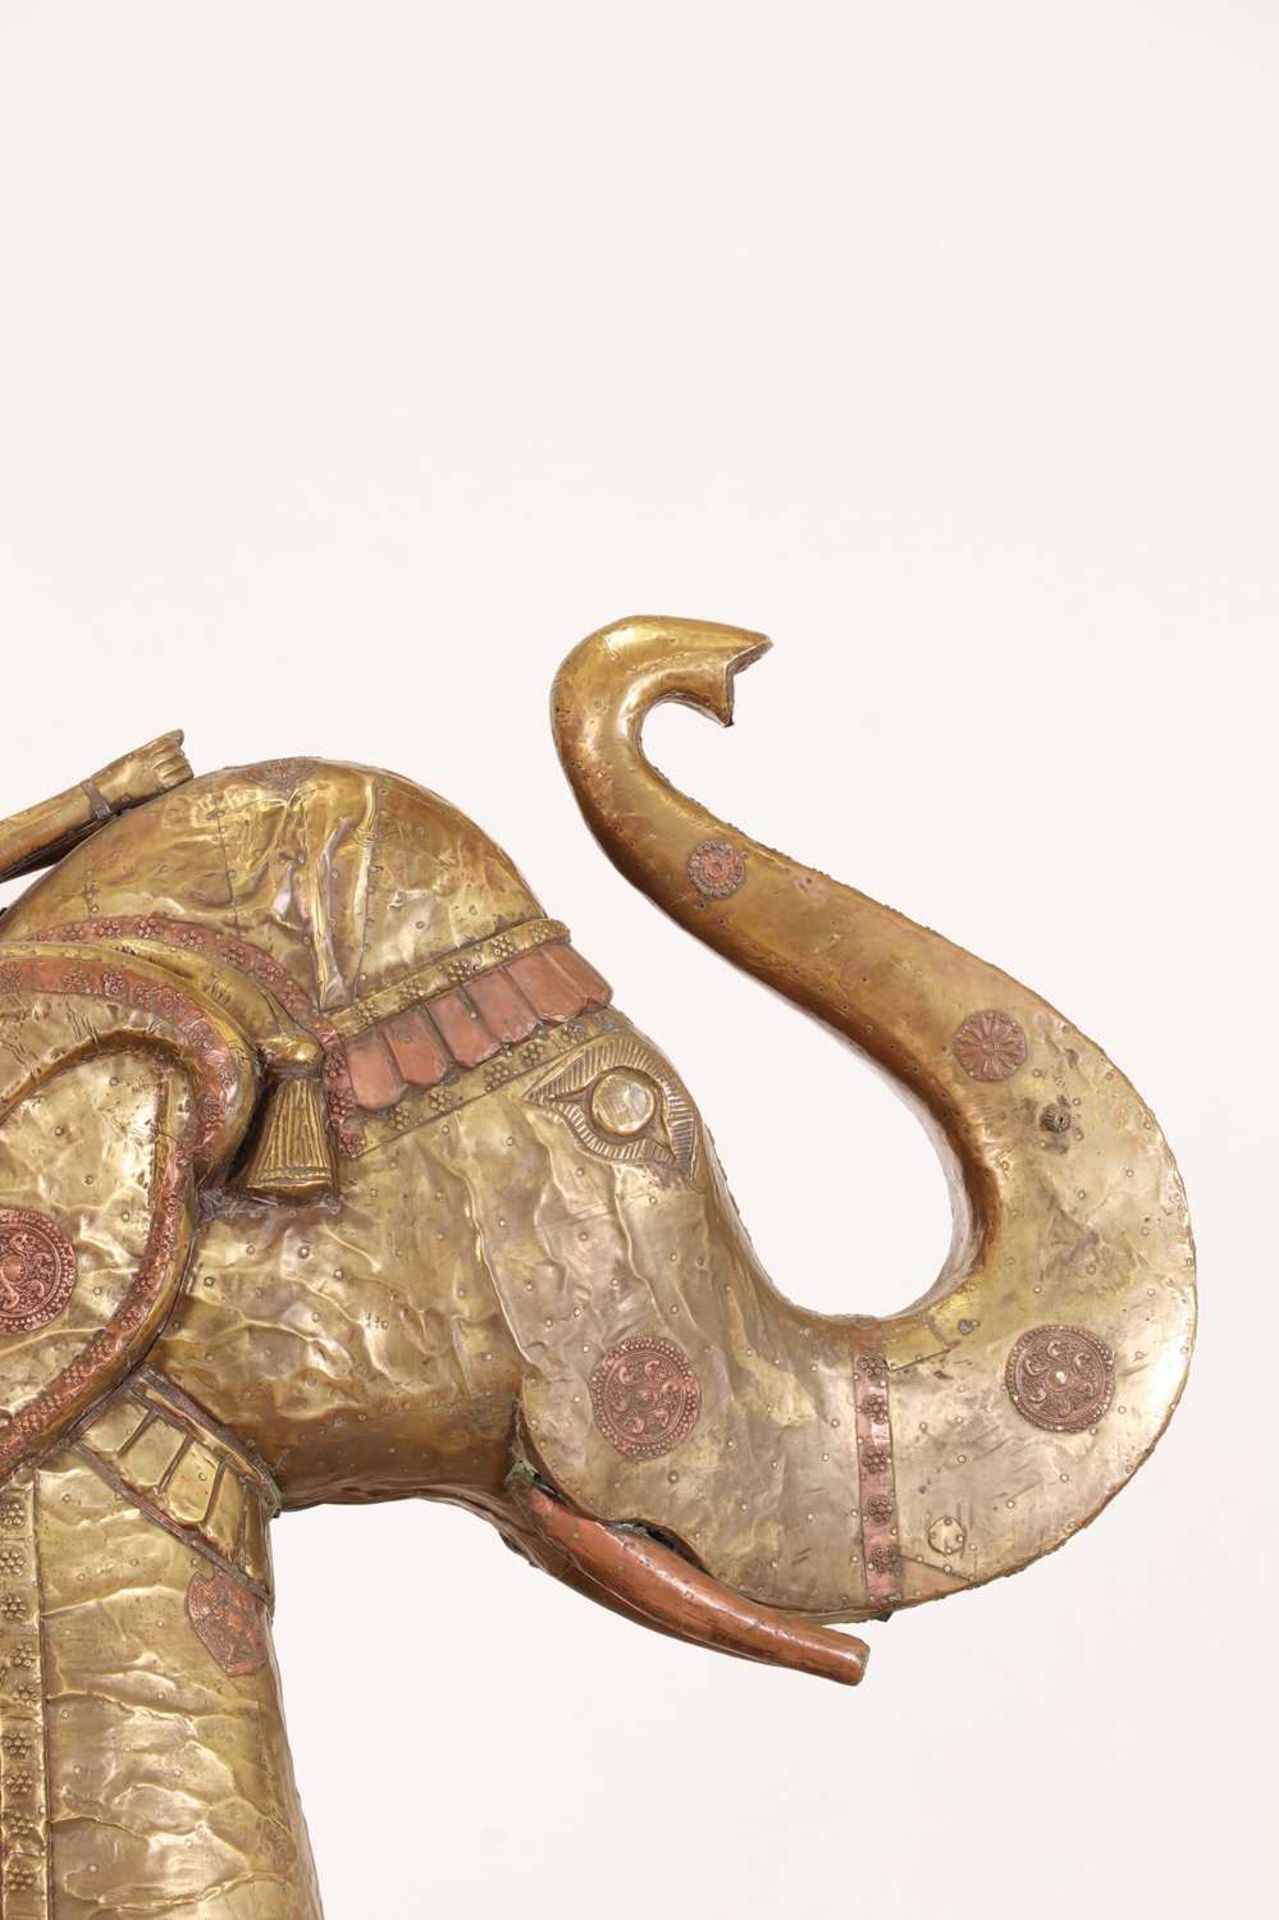 A large copper and brass-clad pull-along elephant,